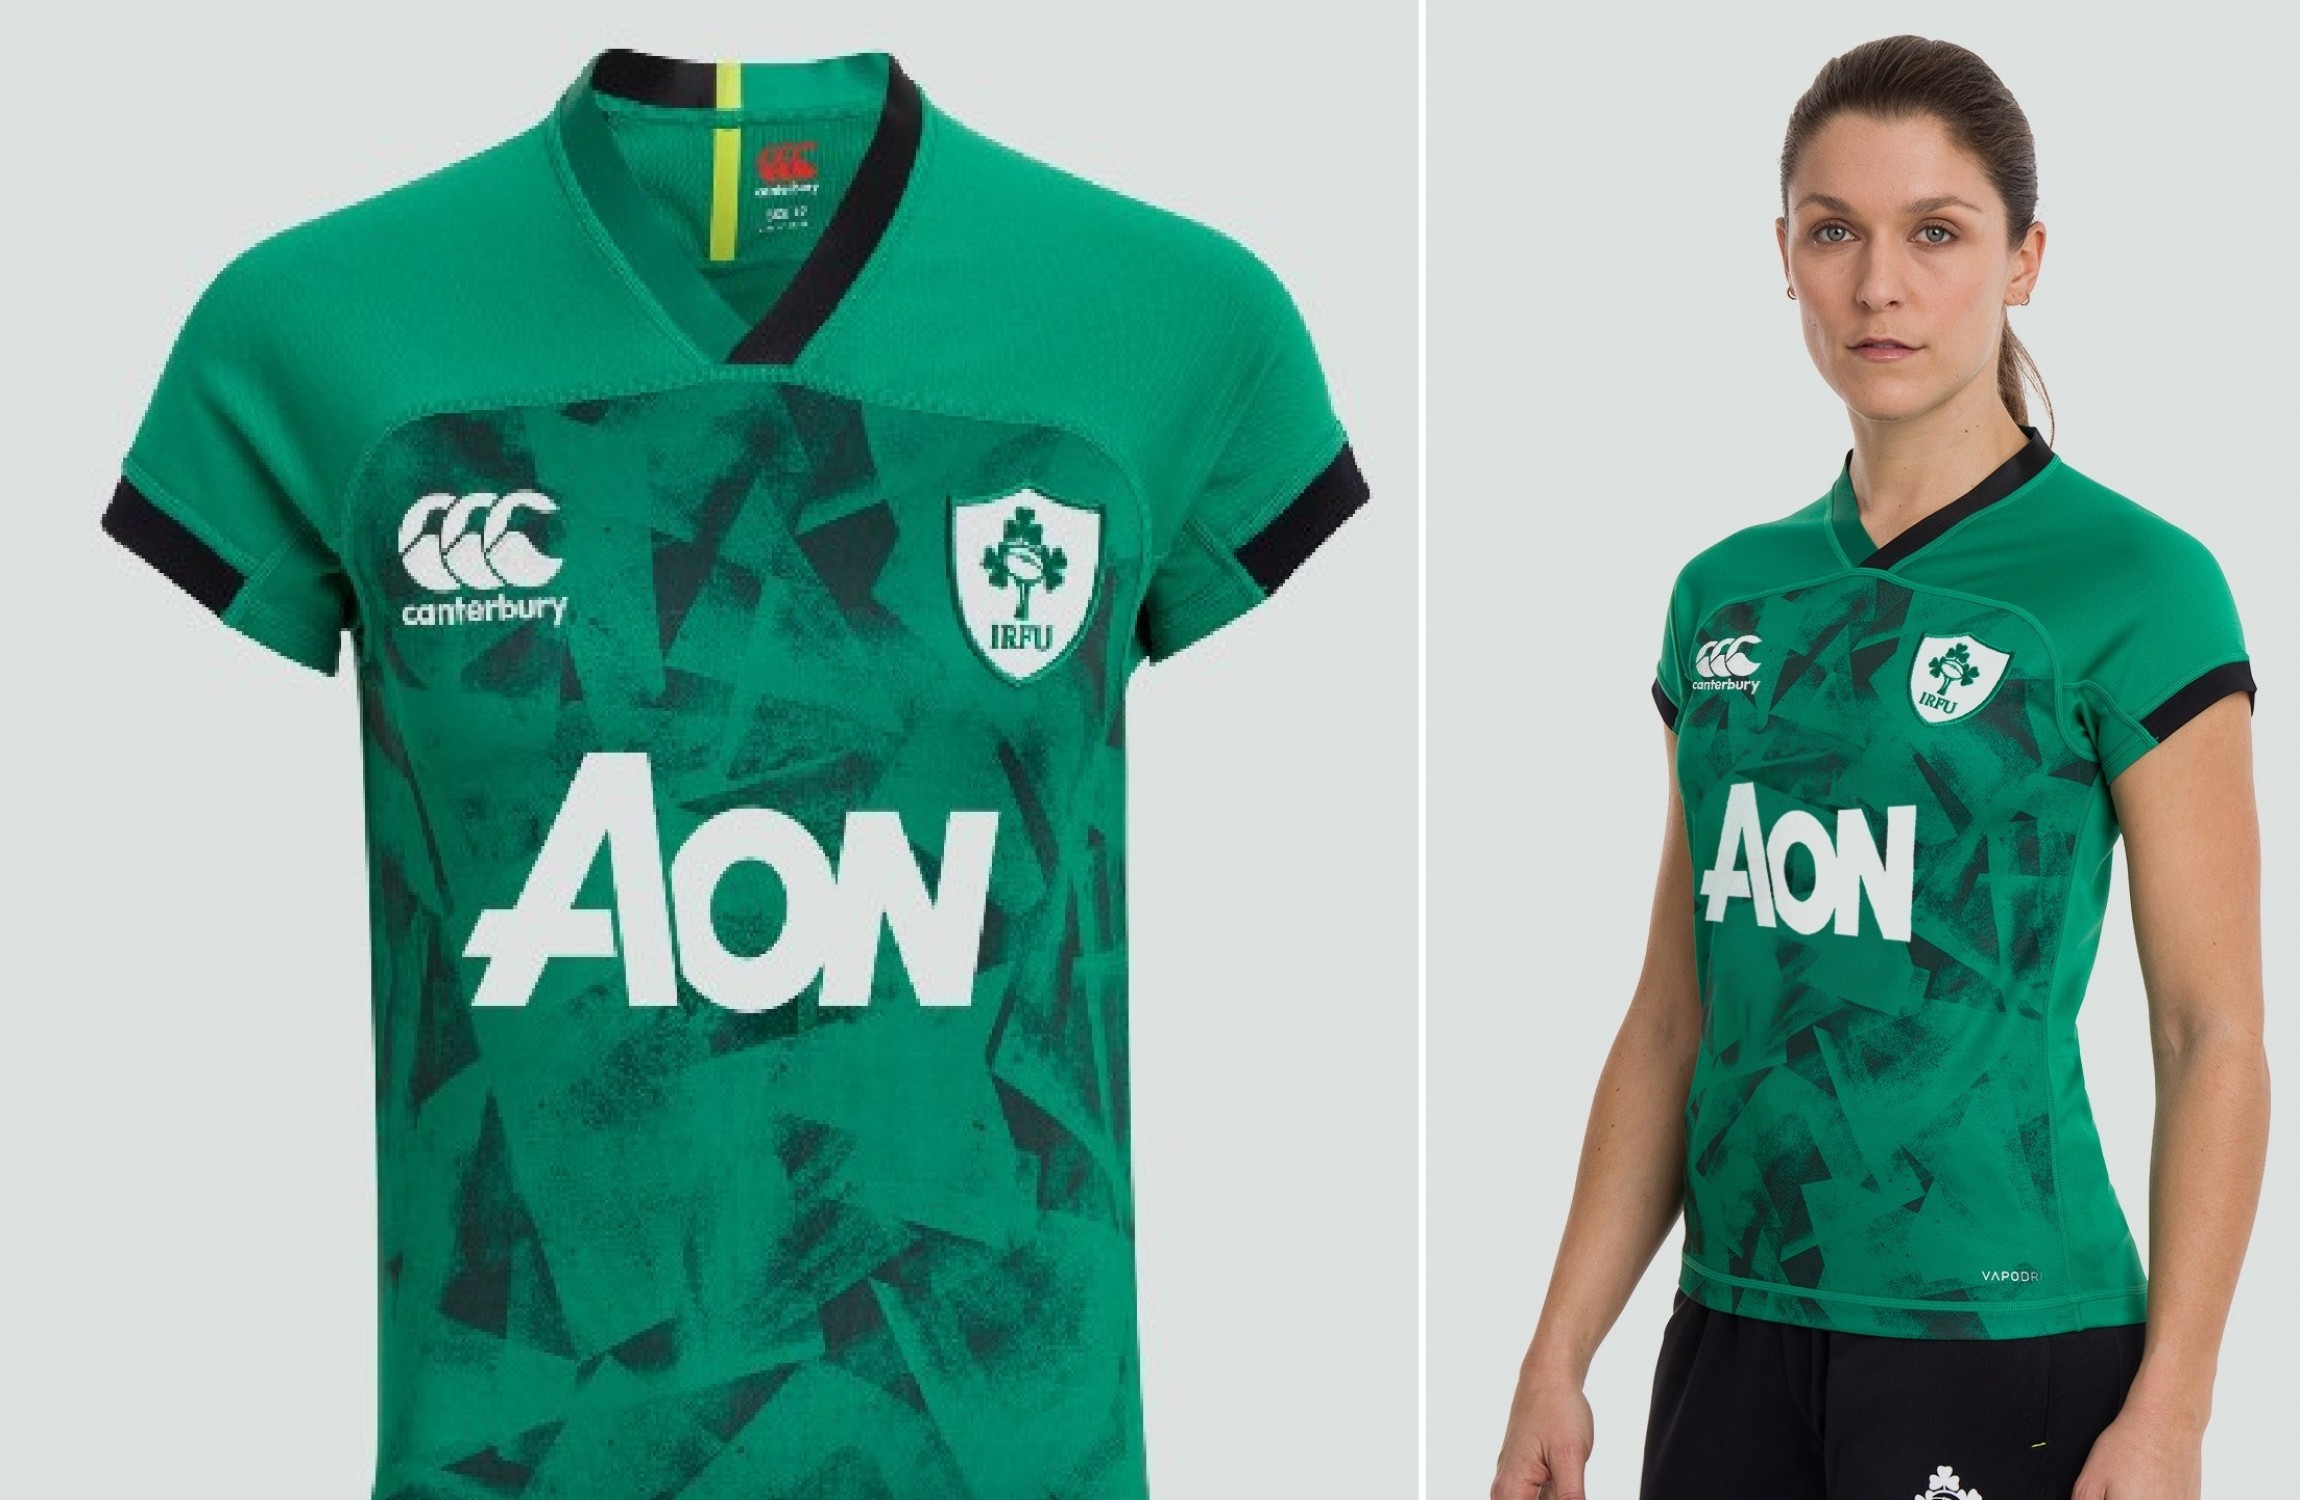 canterbury ireland rugby top